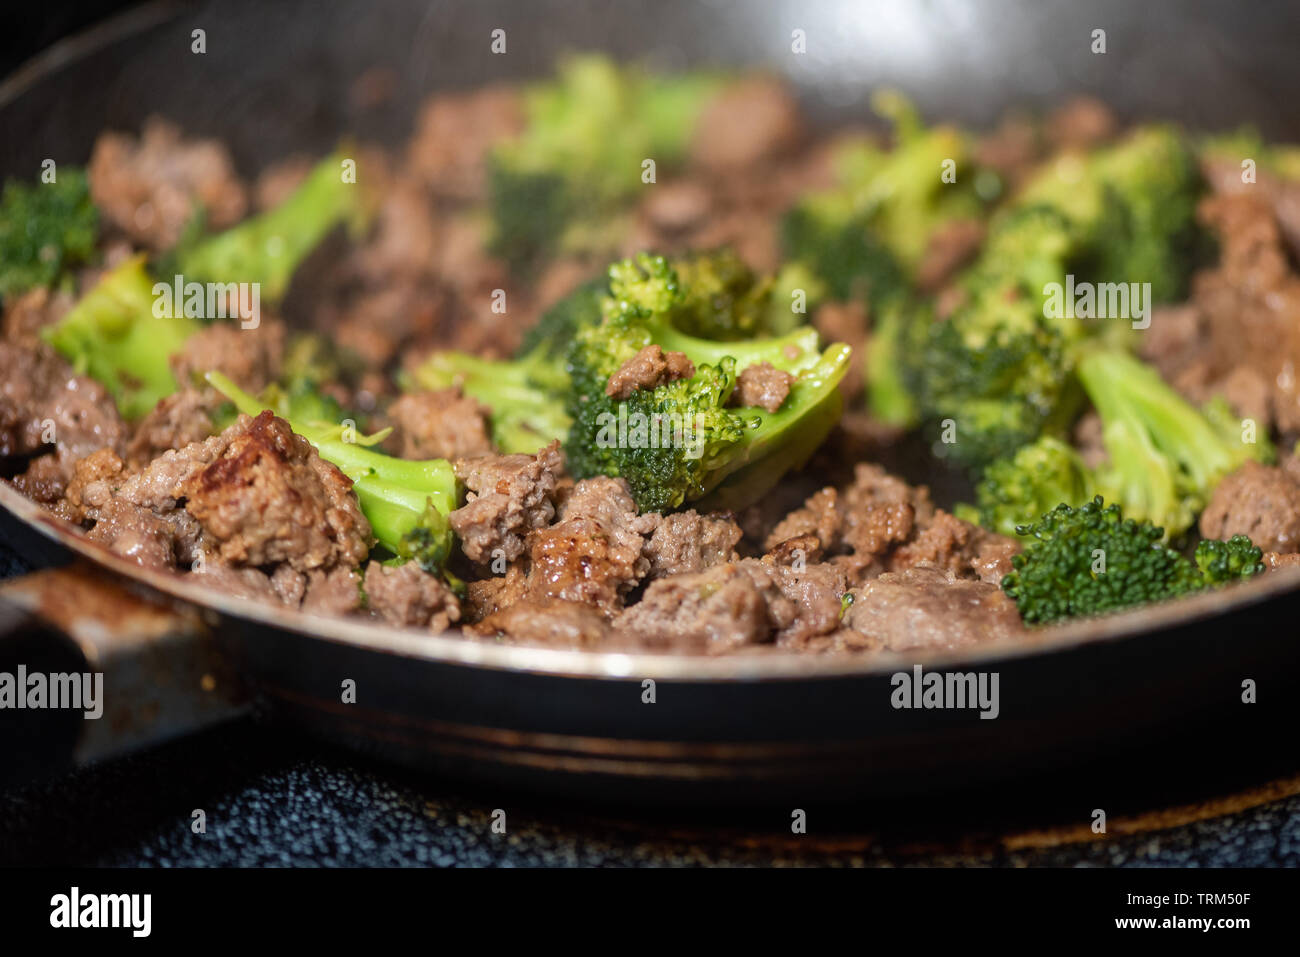 Broccoli and ground meat in a skillet Stock Photo